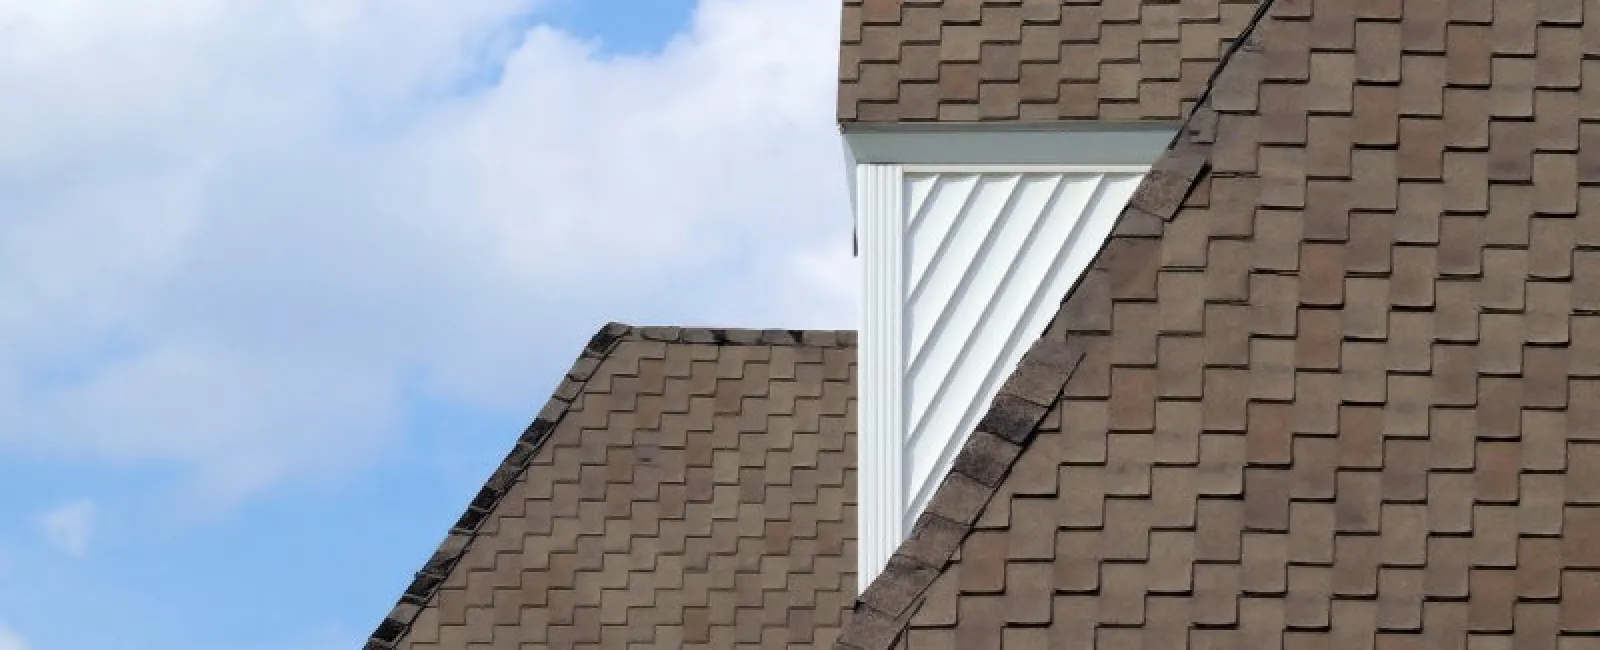 How to pick the best roofing shingles for your home